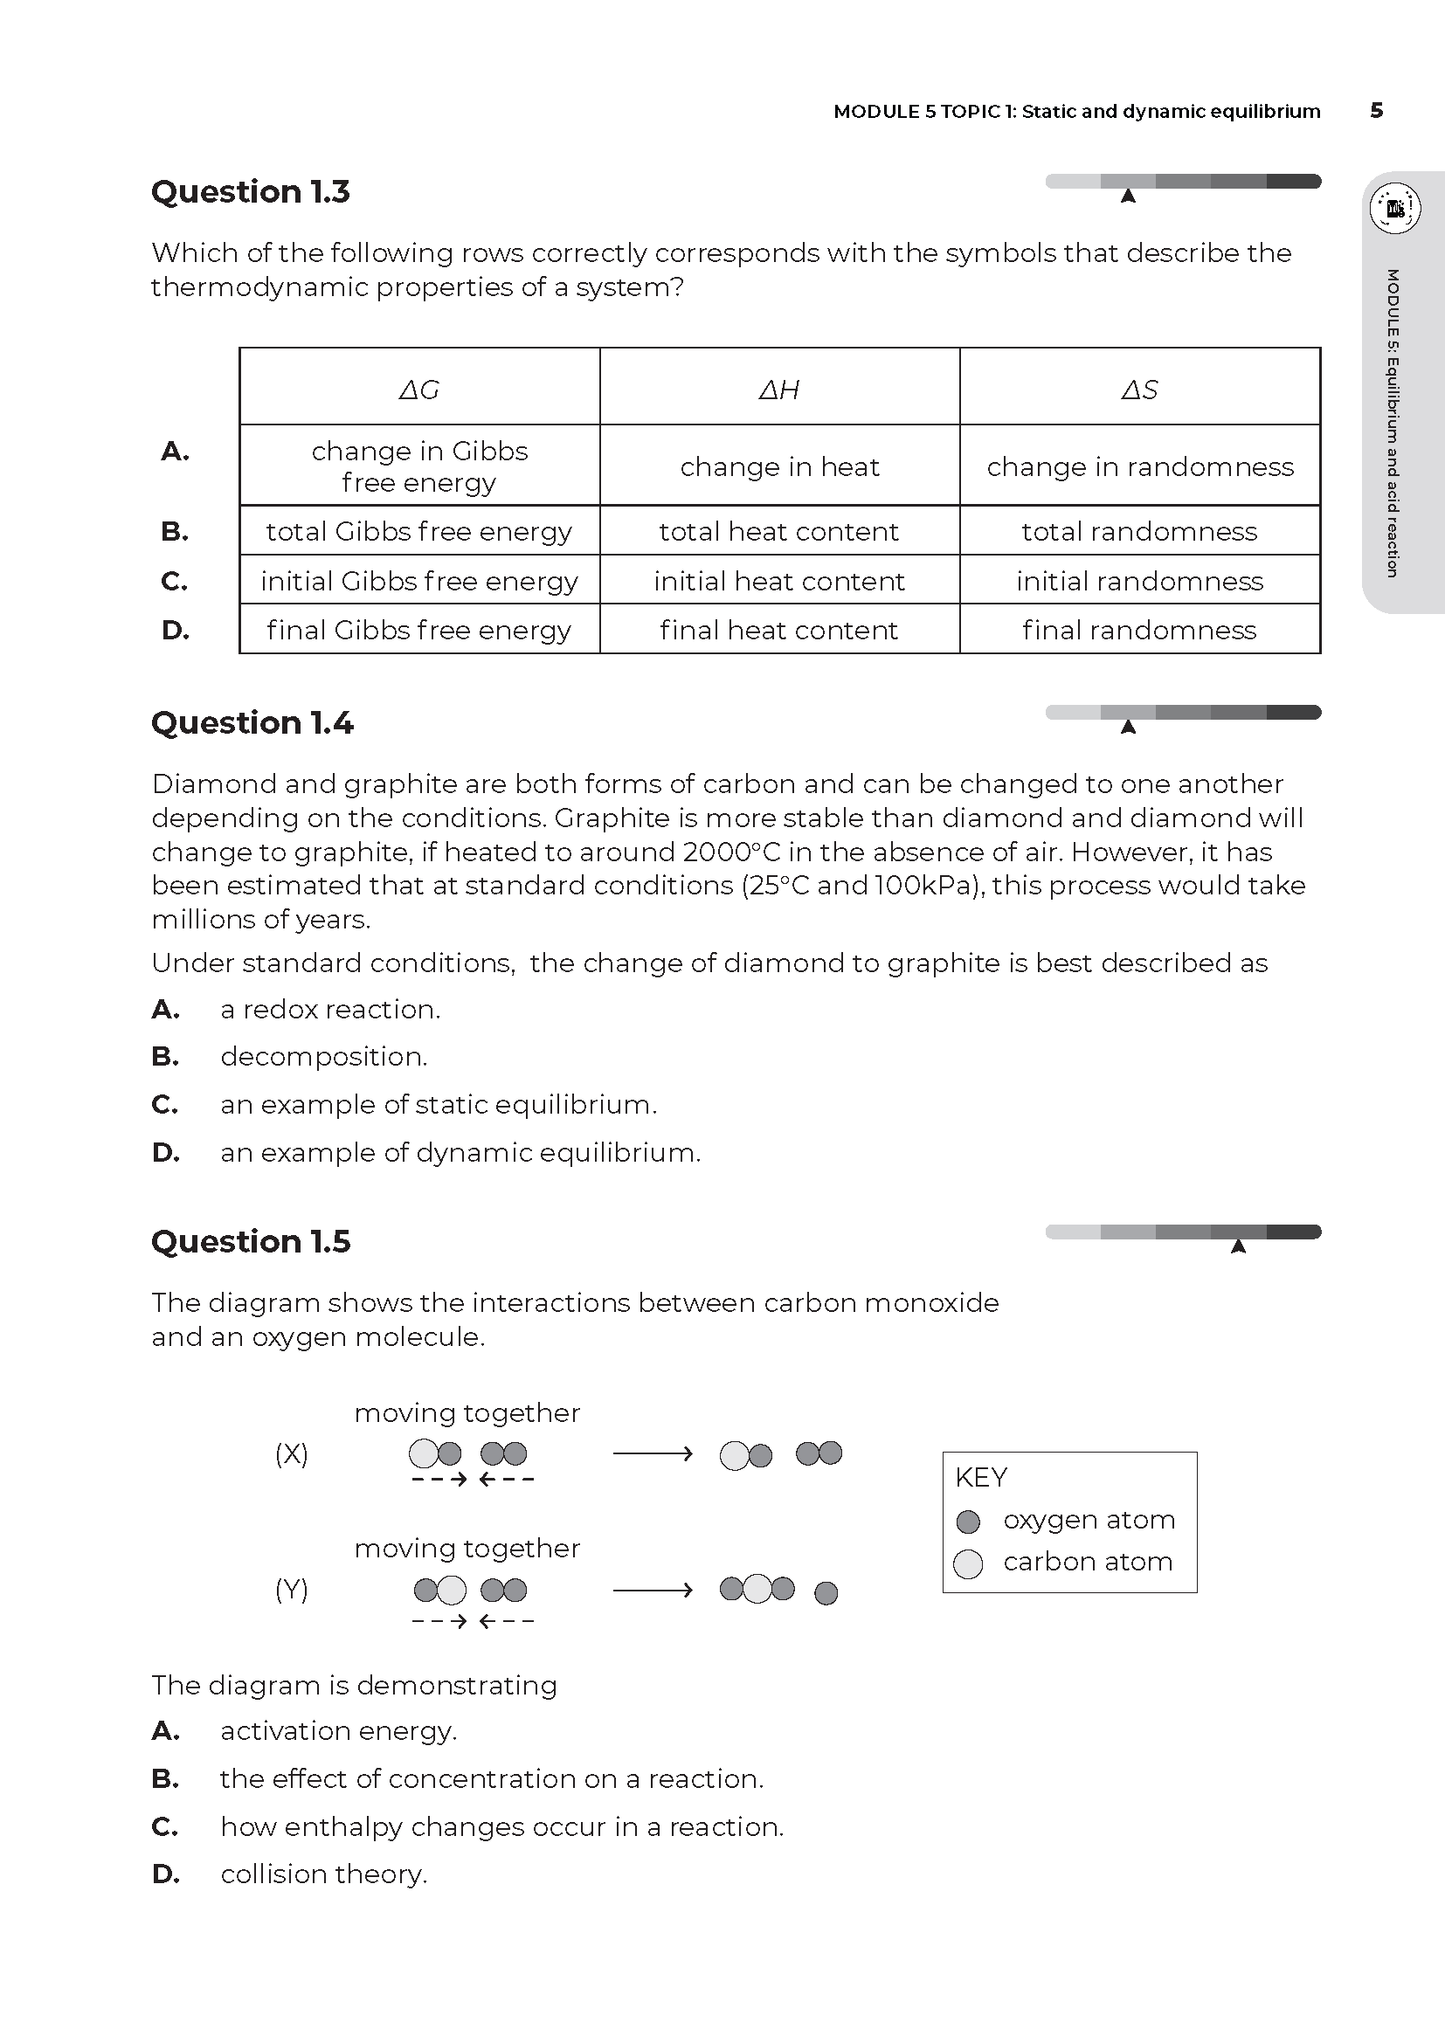 Neap Assessment Series: NSW Year 12 Chemistry